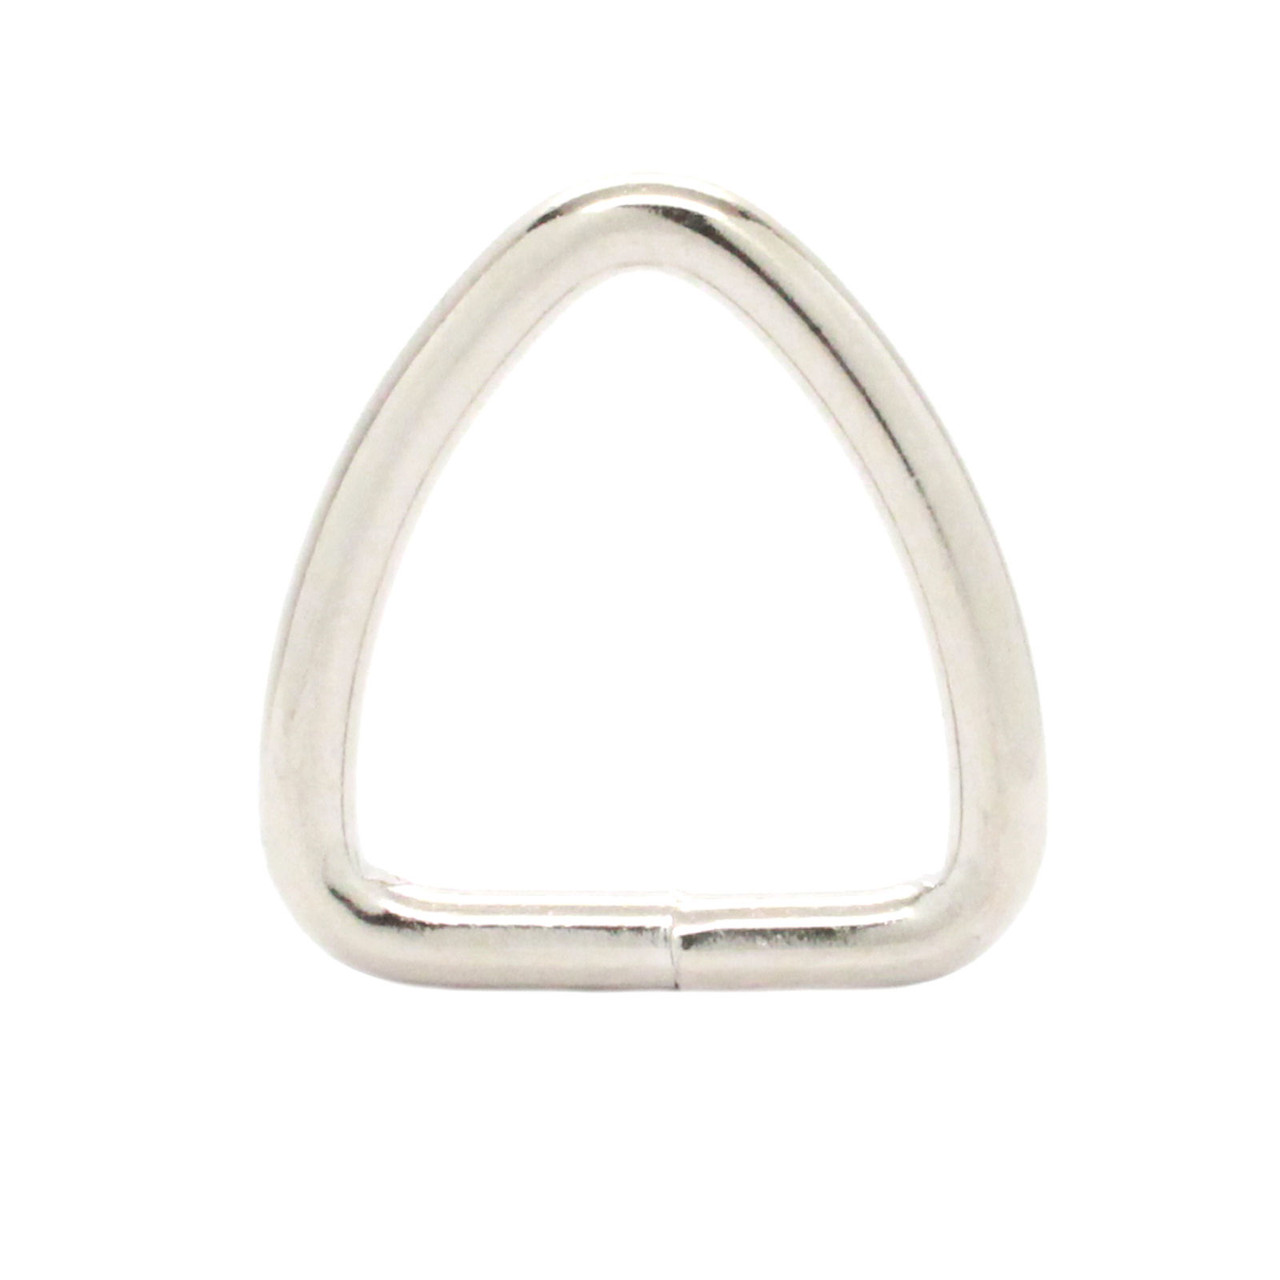 Elongated D-Ring 1 Inch Nickel 21770-02